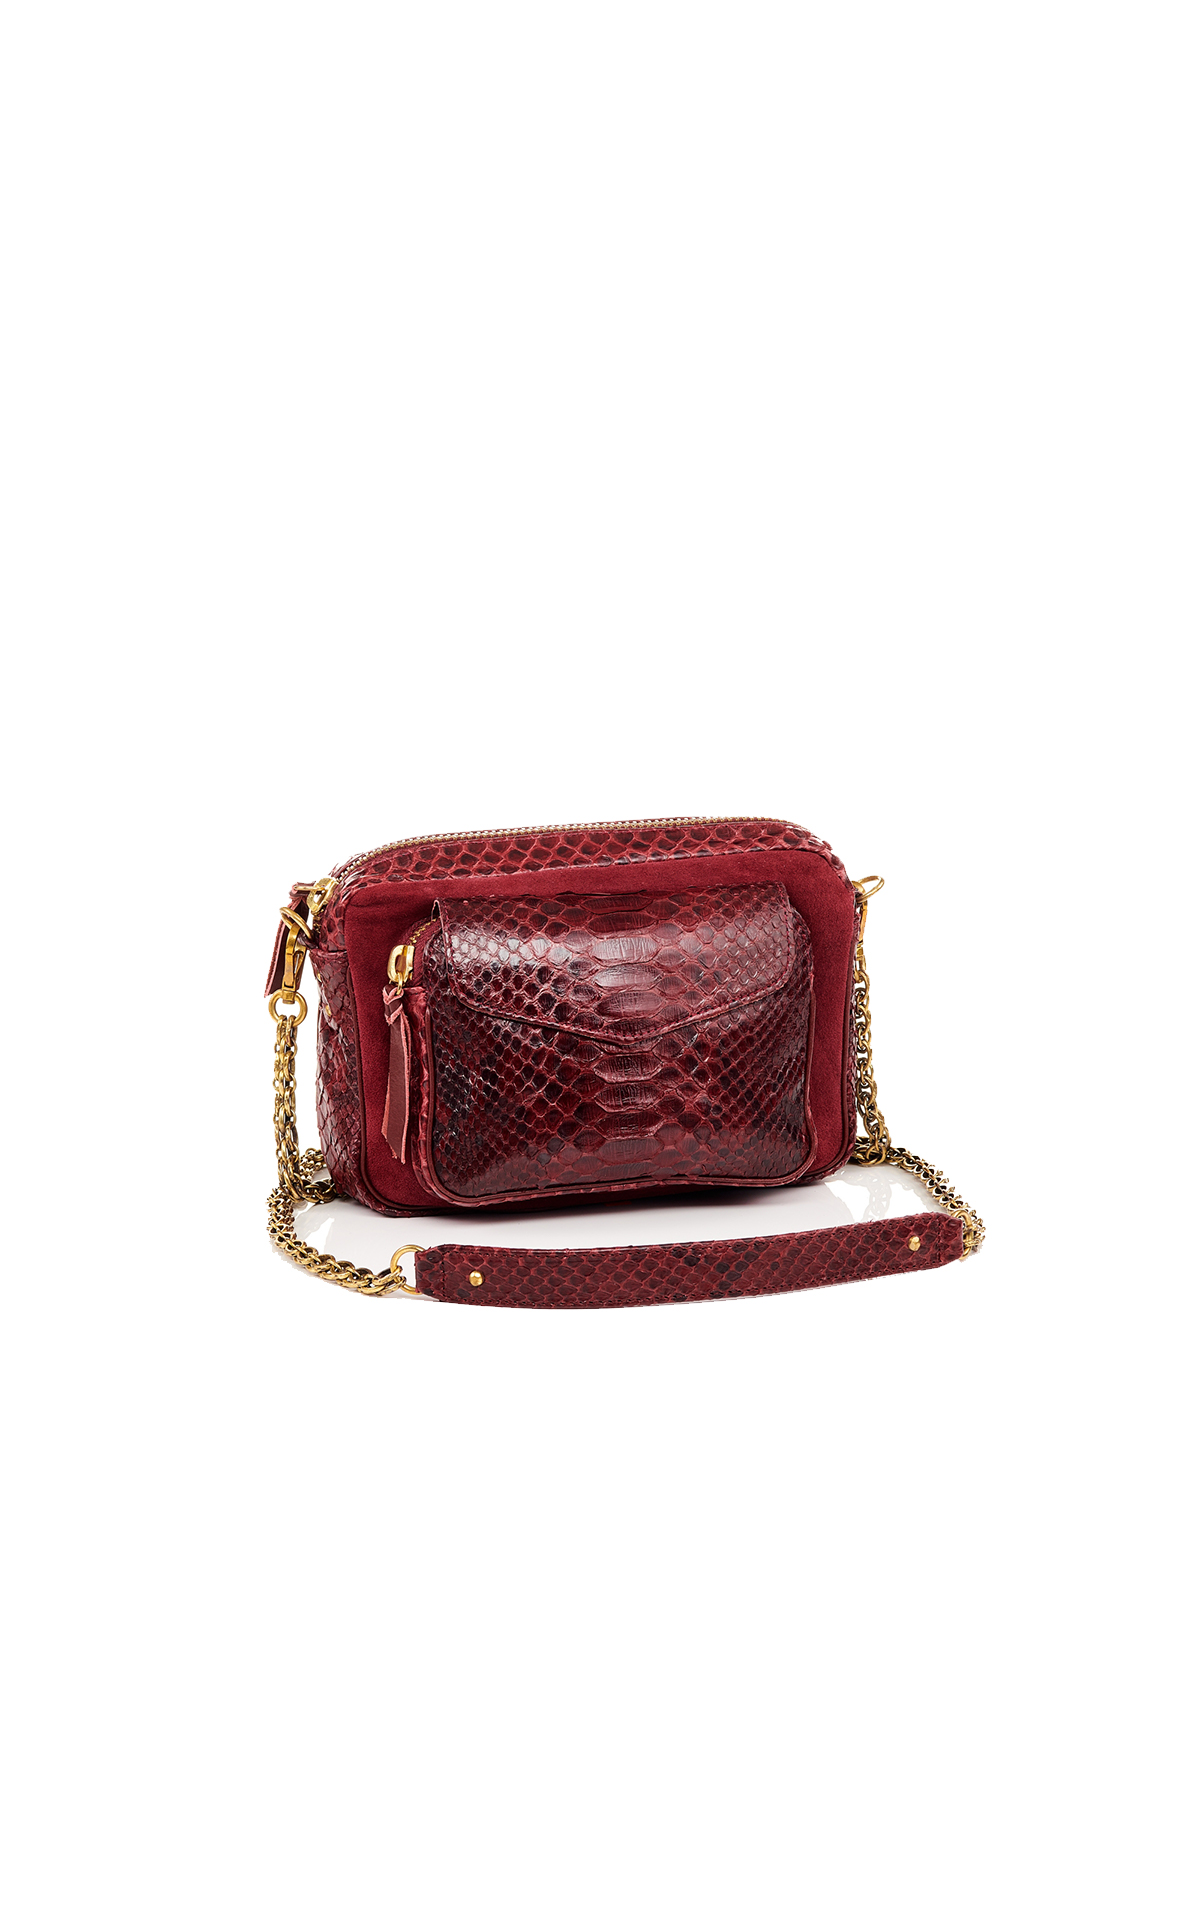 Claris Virot Charly burgundy python and suede bag with chain La Vallée Village